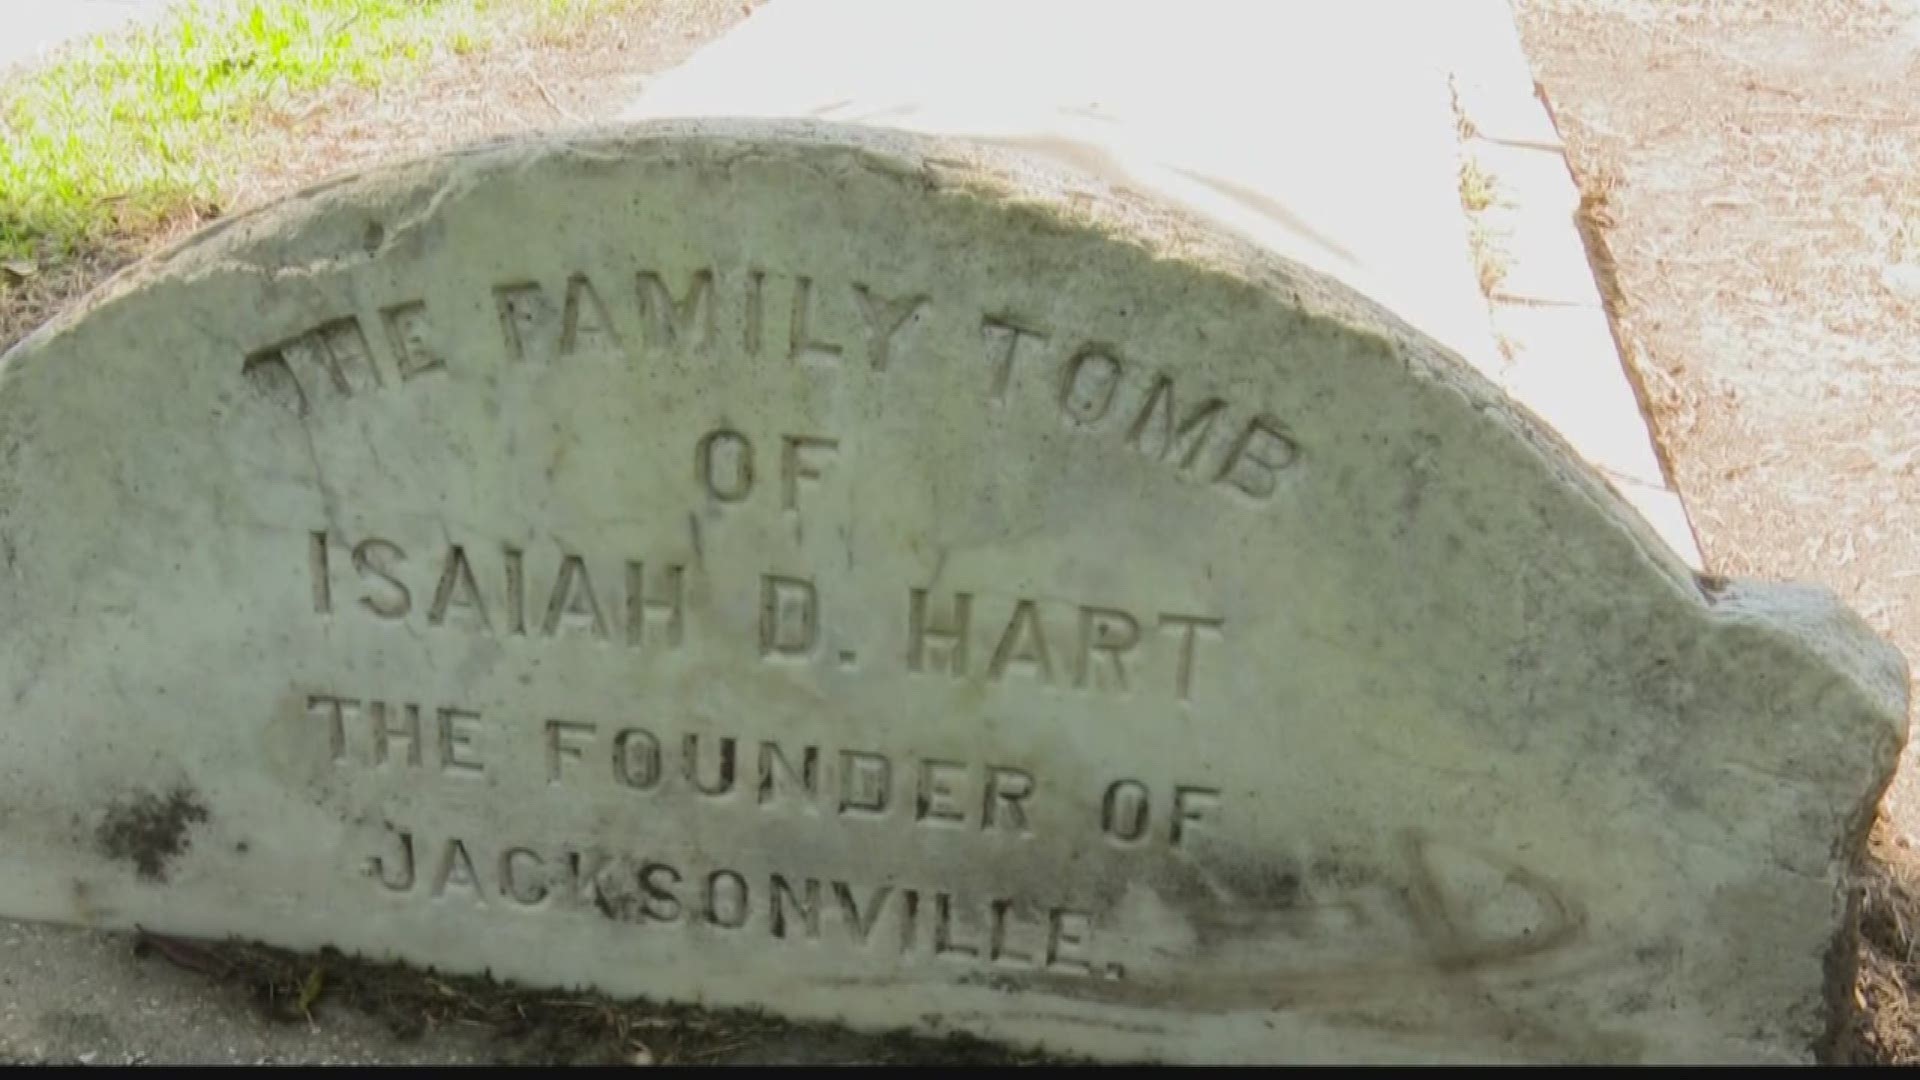 Isaiah D. Hart rests in Evergreen Cemetery. He is the founder of Jacksonville.